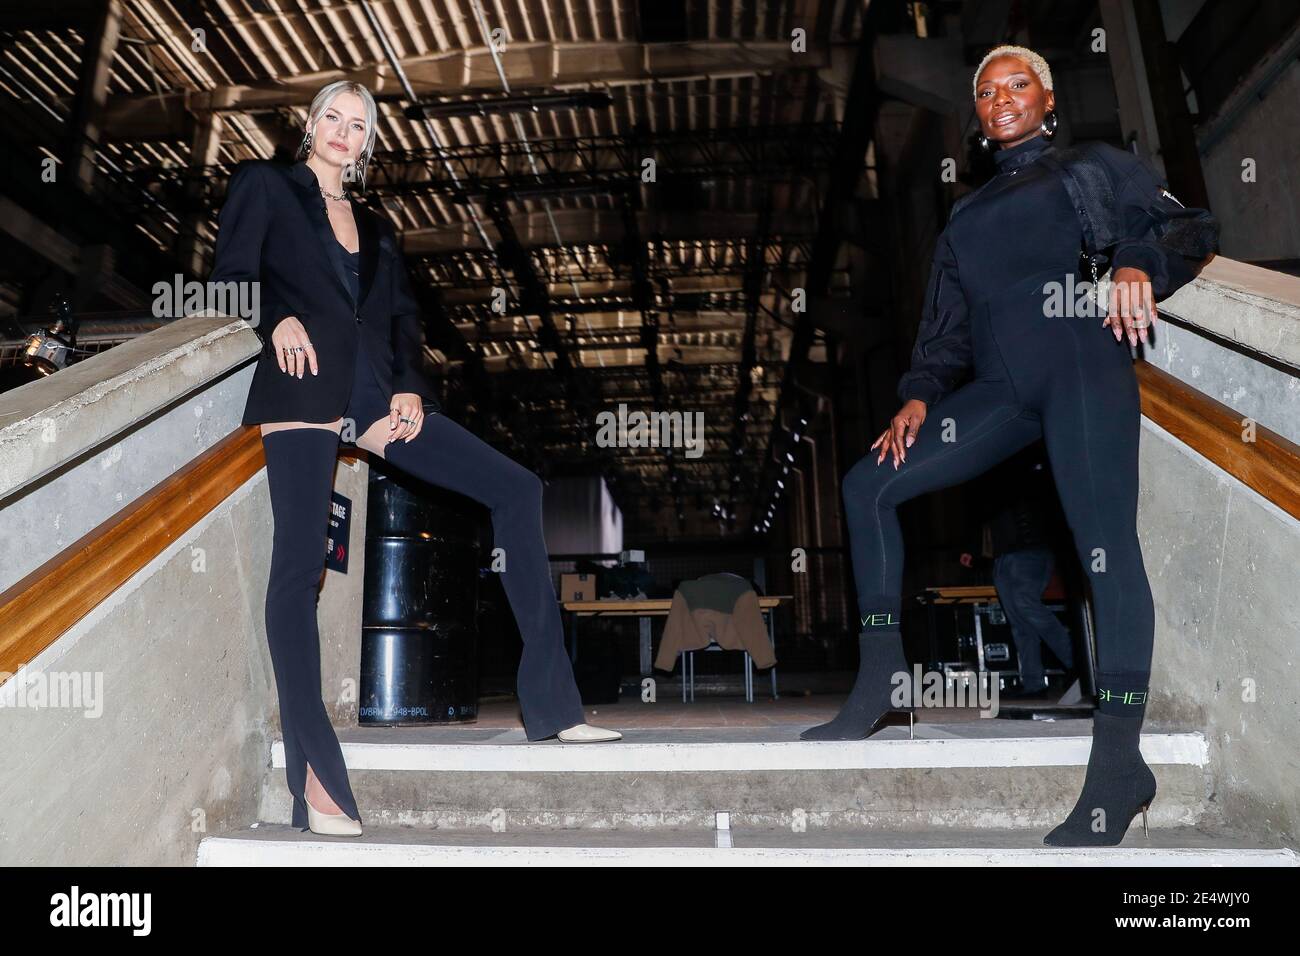 Berlin, Germany. 22nd Jan, 2021. Lena Gercke (l) and Nikeata Thompson stand  on a staircase before the show at the About You Fashion Week production at  Kraftwerk in Köpenicker Straße. The Berlin